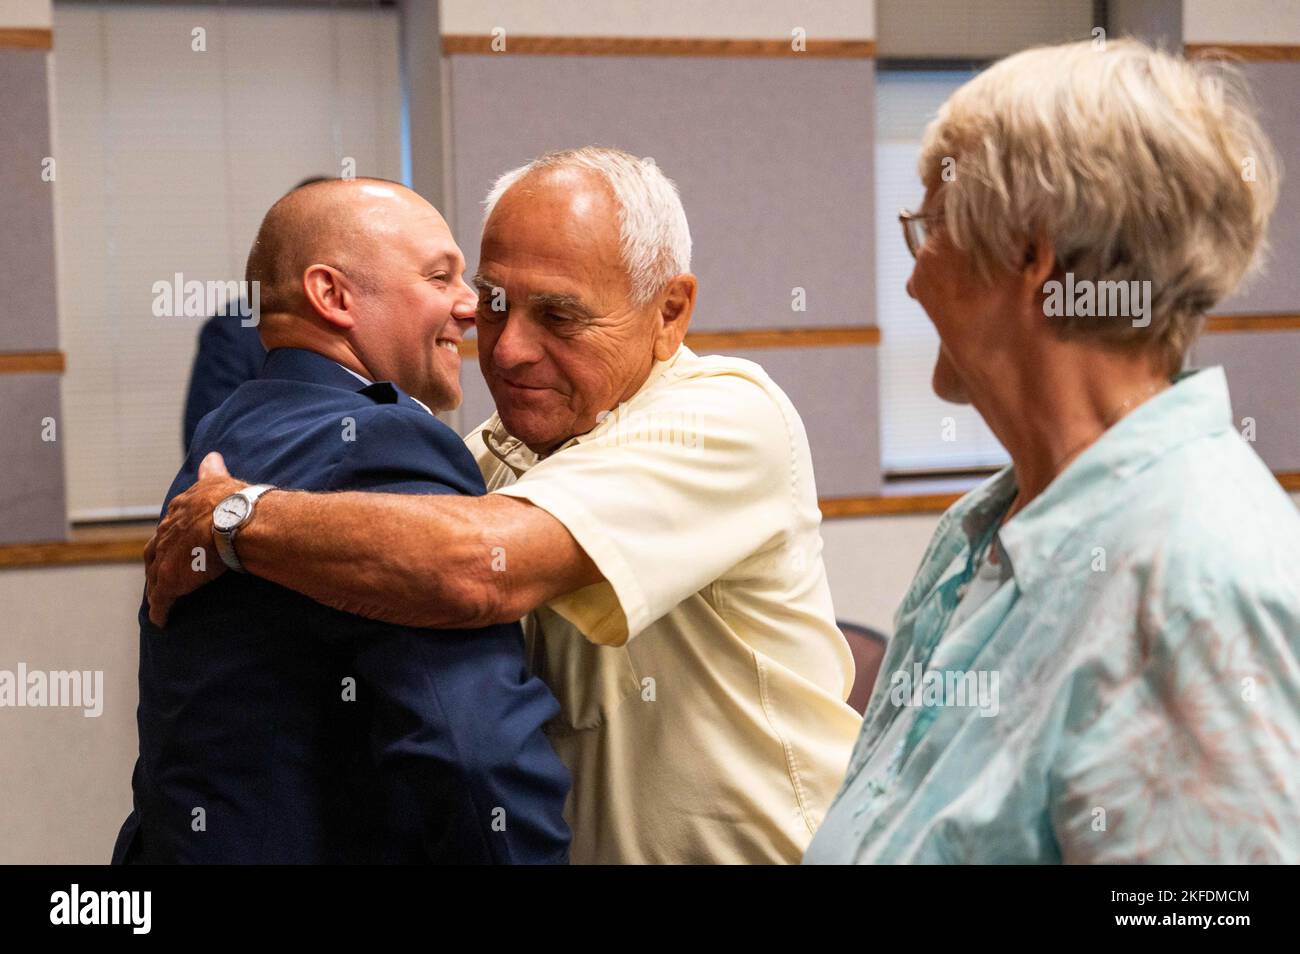 U.S. Air Force Lt. Col. Aaron Larimore, Missouri Air National Guard, hugs his father during his change of command ceremony at Rosecrans Air National Guard Base, St. Joseph, Missouri, Sept. 10, 2022. Larimore became the commander of the 139th Communications Flight. Stock Photo